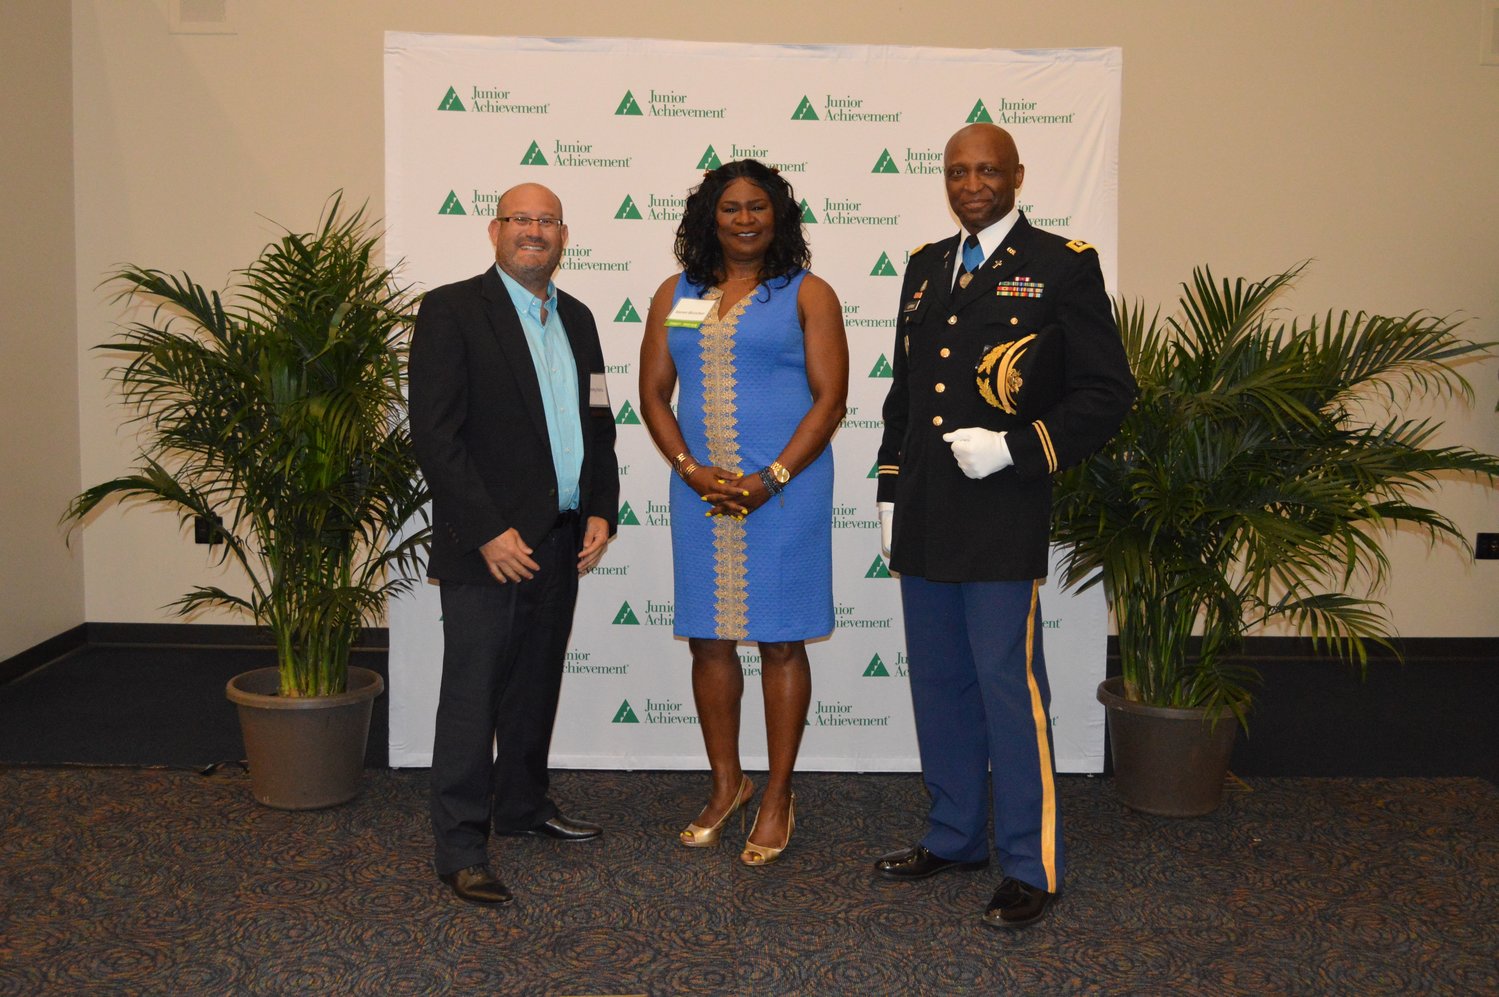 Jeremy Harris, Karen Blutcher and Lt. Col. William Liptrot were presented awards at the Junior Achievement of North Florida’s 2022 Hall of Fame Luncheon.